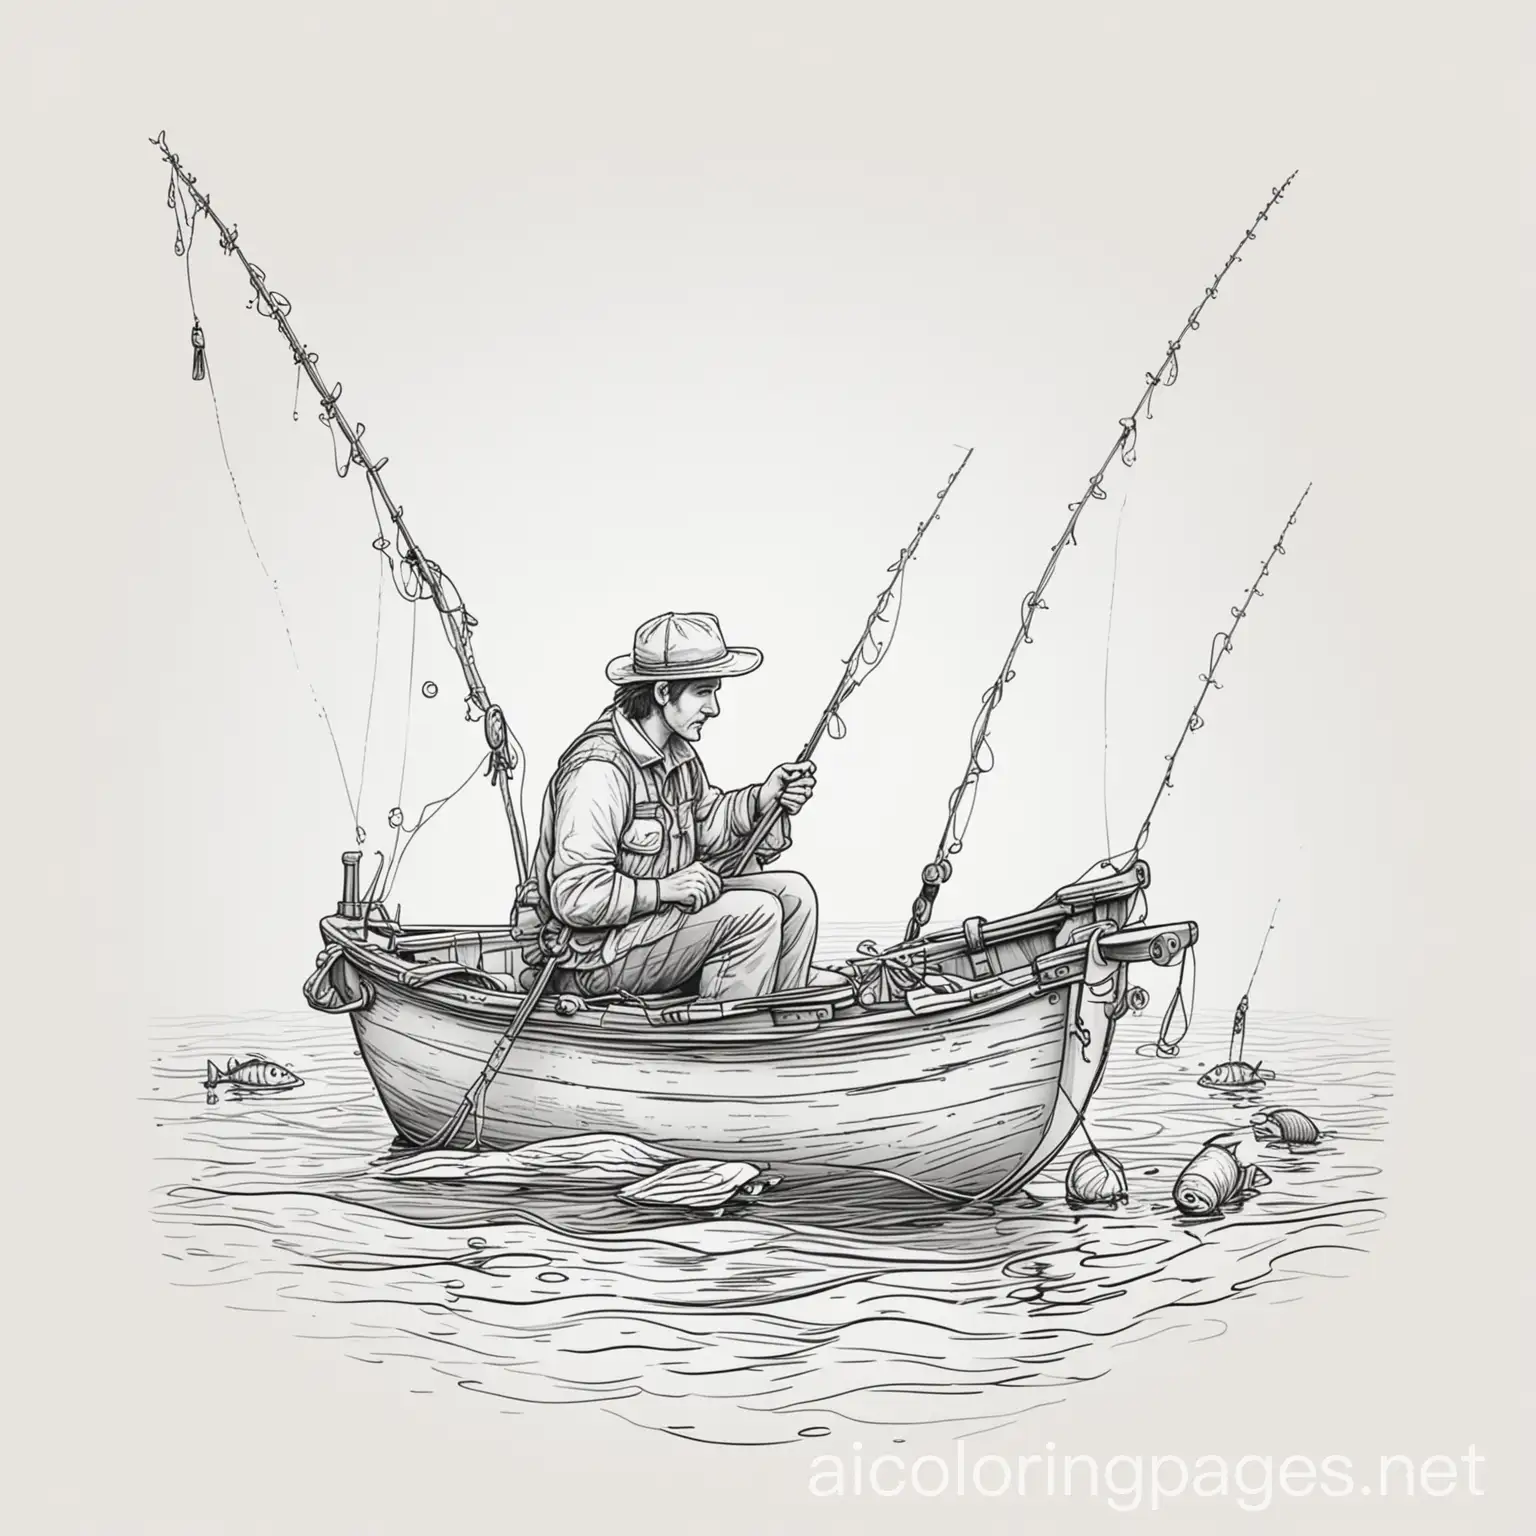 fishing, Coloring Page, black and white, line art, white background, Simplicity, Ample White Space. The background of the coloring page is plain white to make it easy for young children to color within the lines. The outlines of all the subjects are easy to distinguish, making it simple for kids to color without too much difficulty